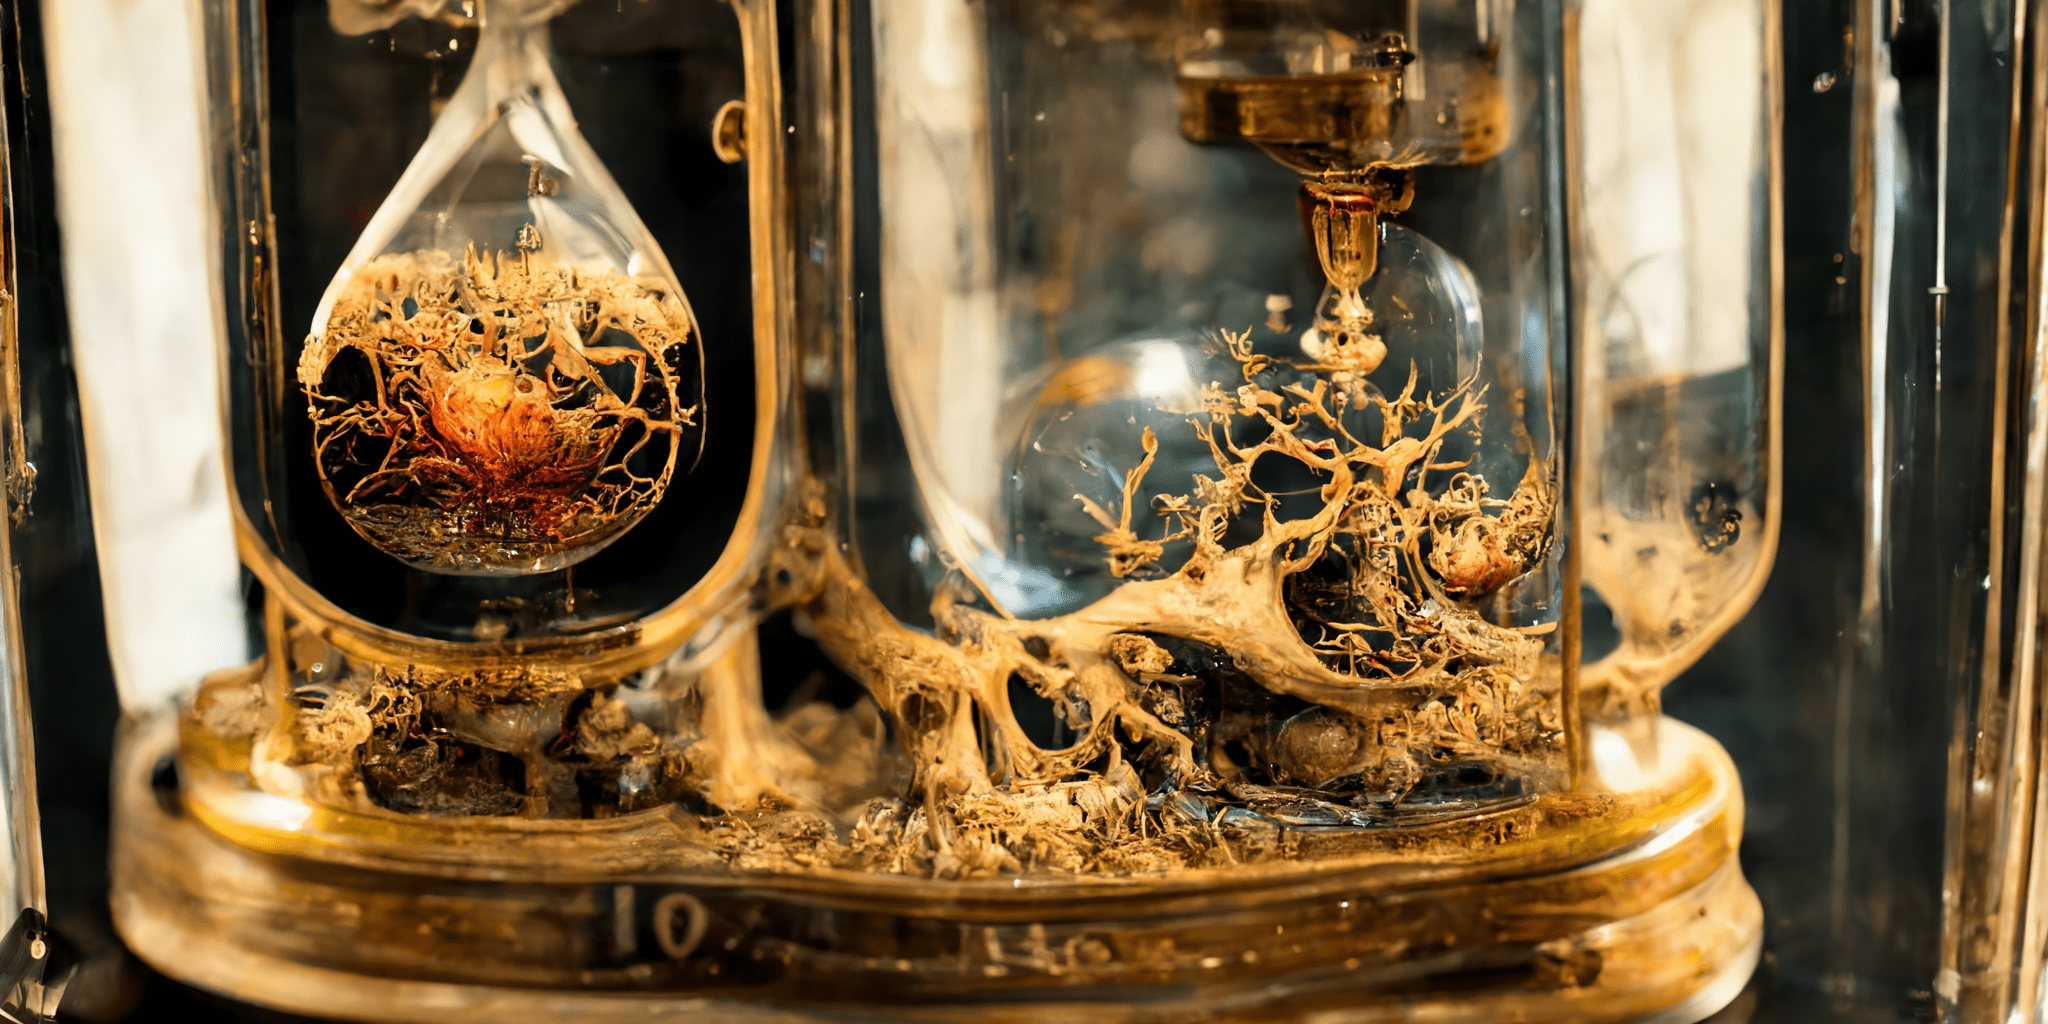 In an hourglass I cannot turn upside down – a bottle of roots